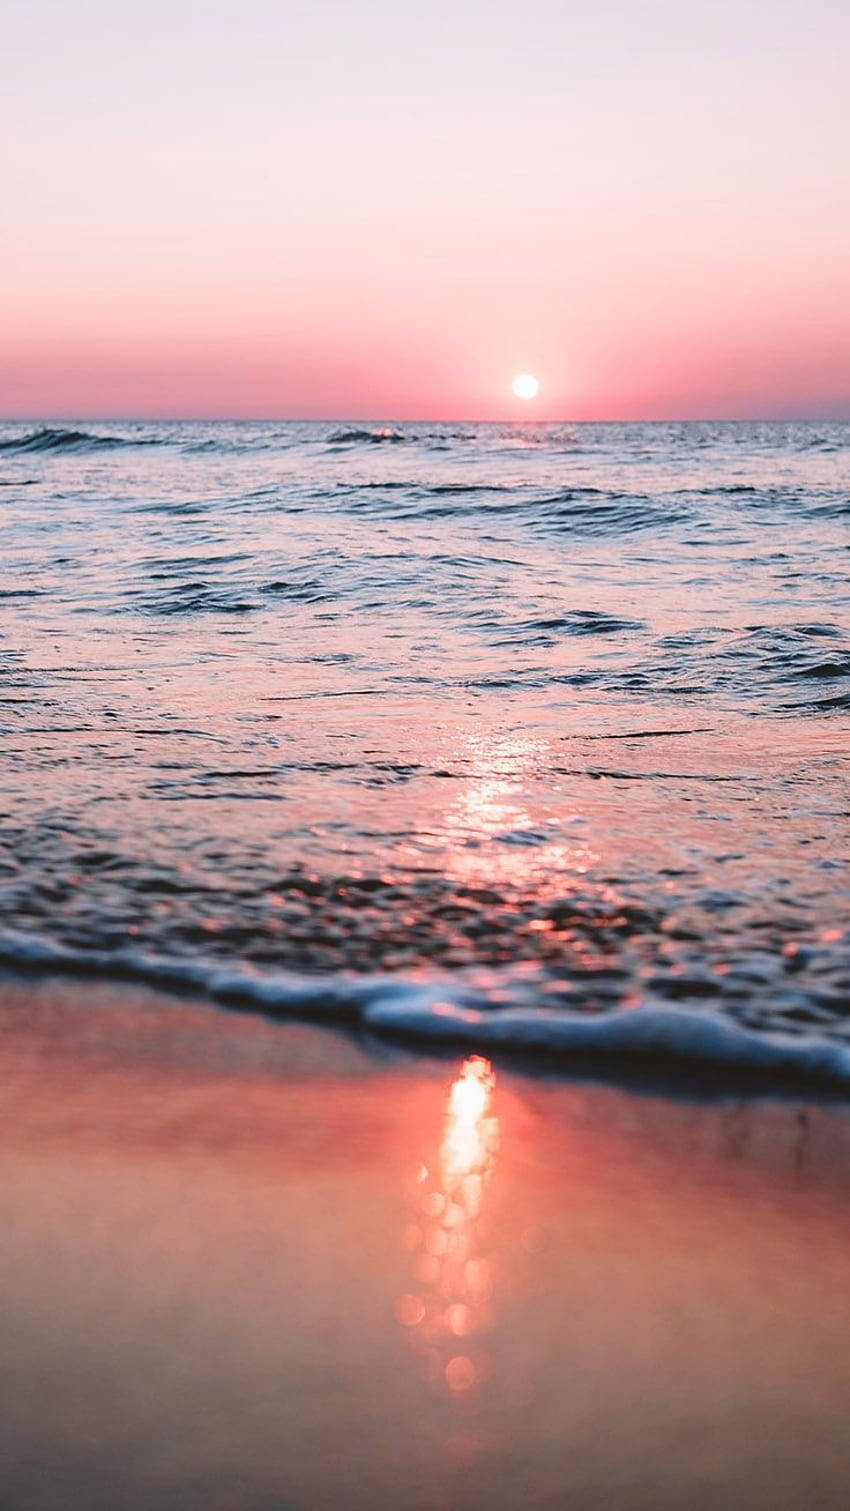 Capturing the beauty of a pink sunset on an iPhone. Wallpaper